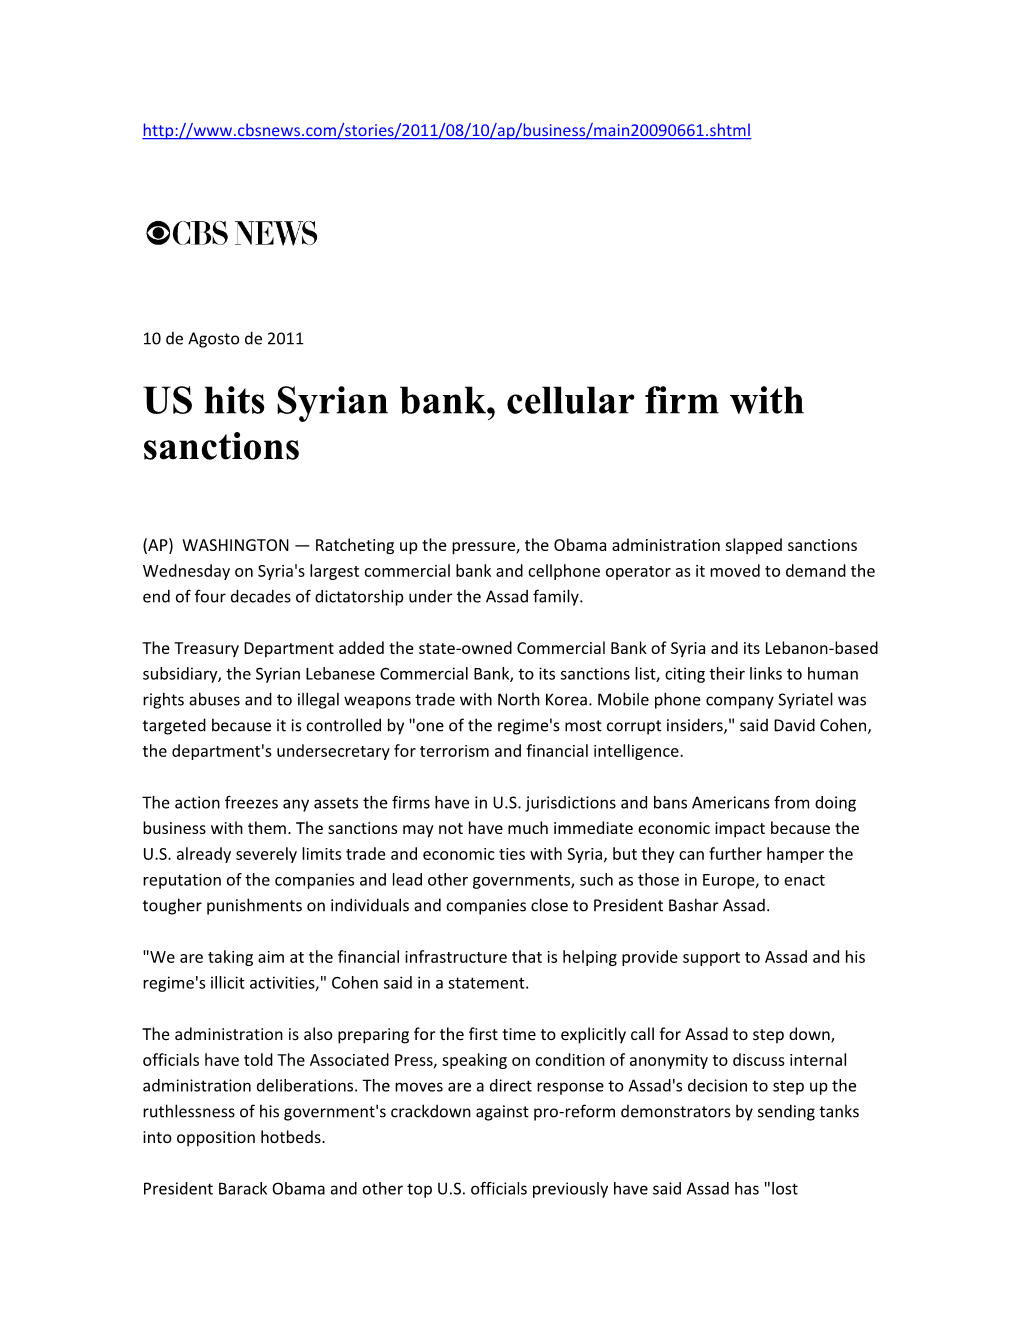 US Hits Syrian Bank, Cellular Firm with Sanctions